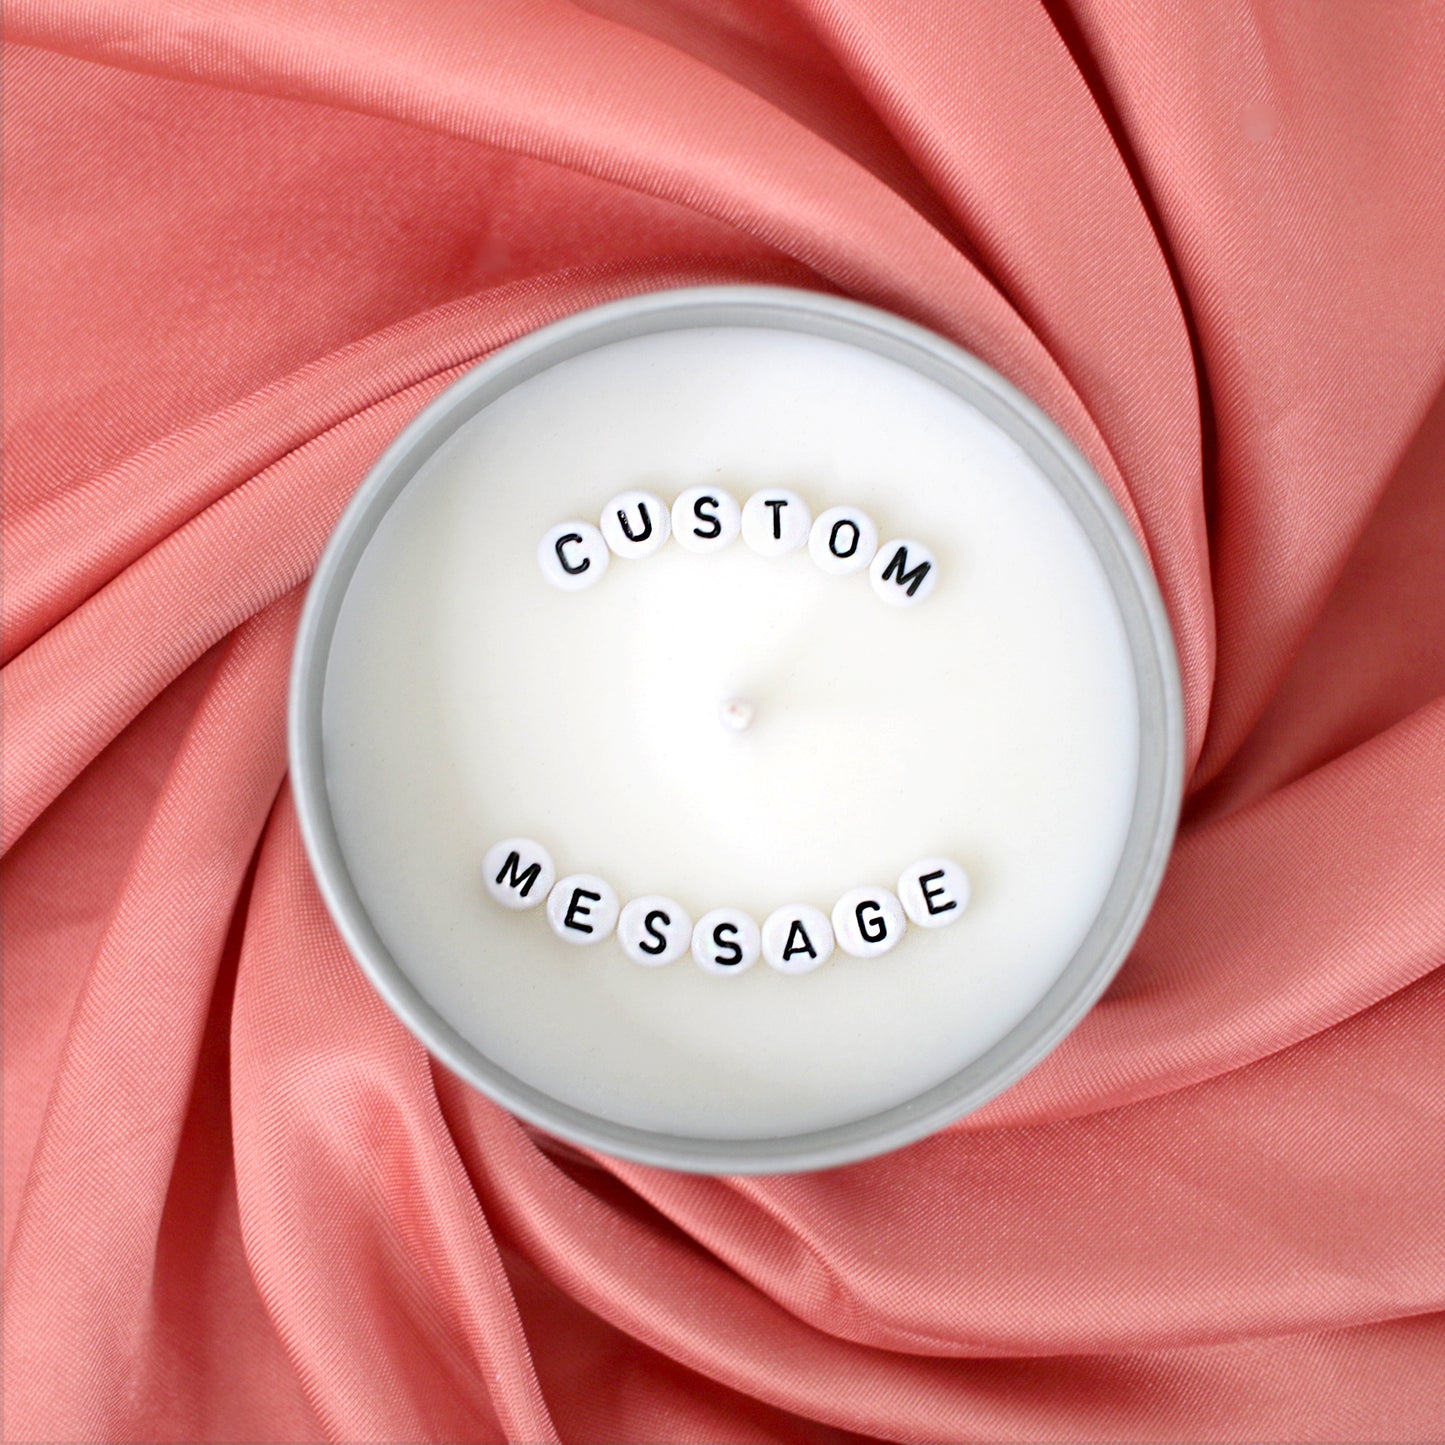 CUSTOM MESSAGE CANDLE